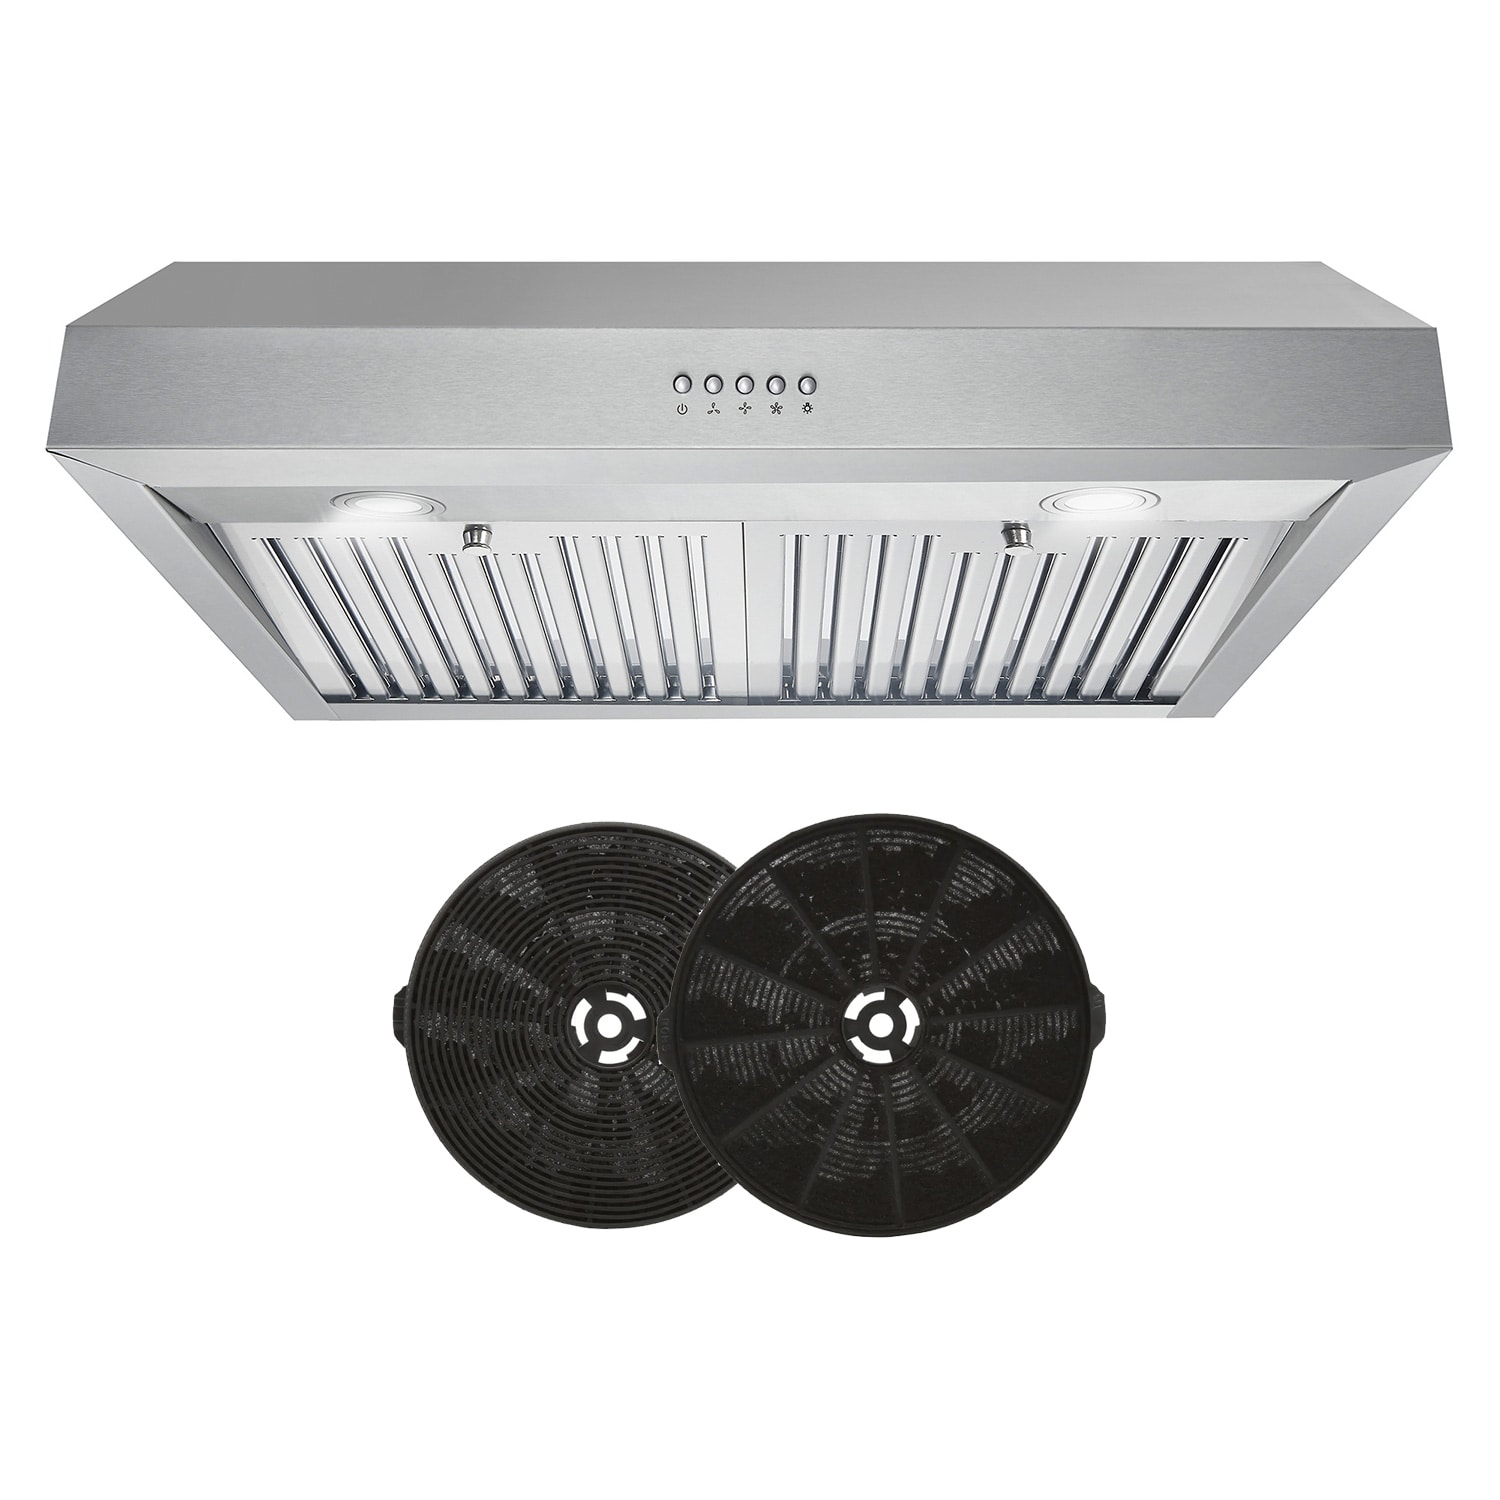 Details about   Cosmo 5MU30 30 in Ductless Convertible D Under Cabinet Range Hood with Ducted 